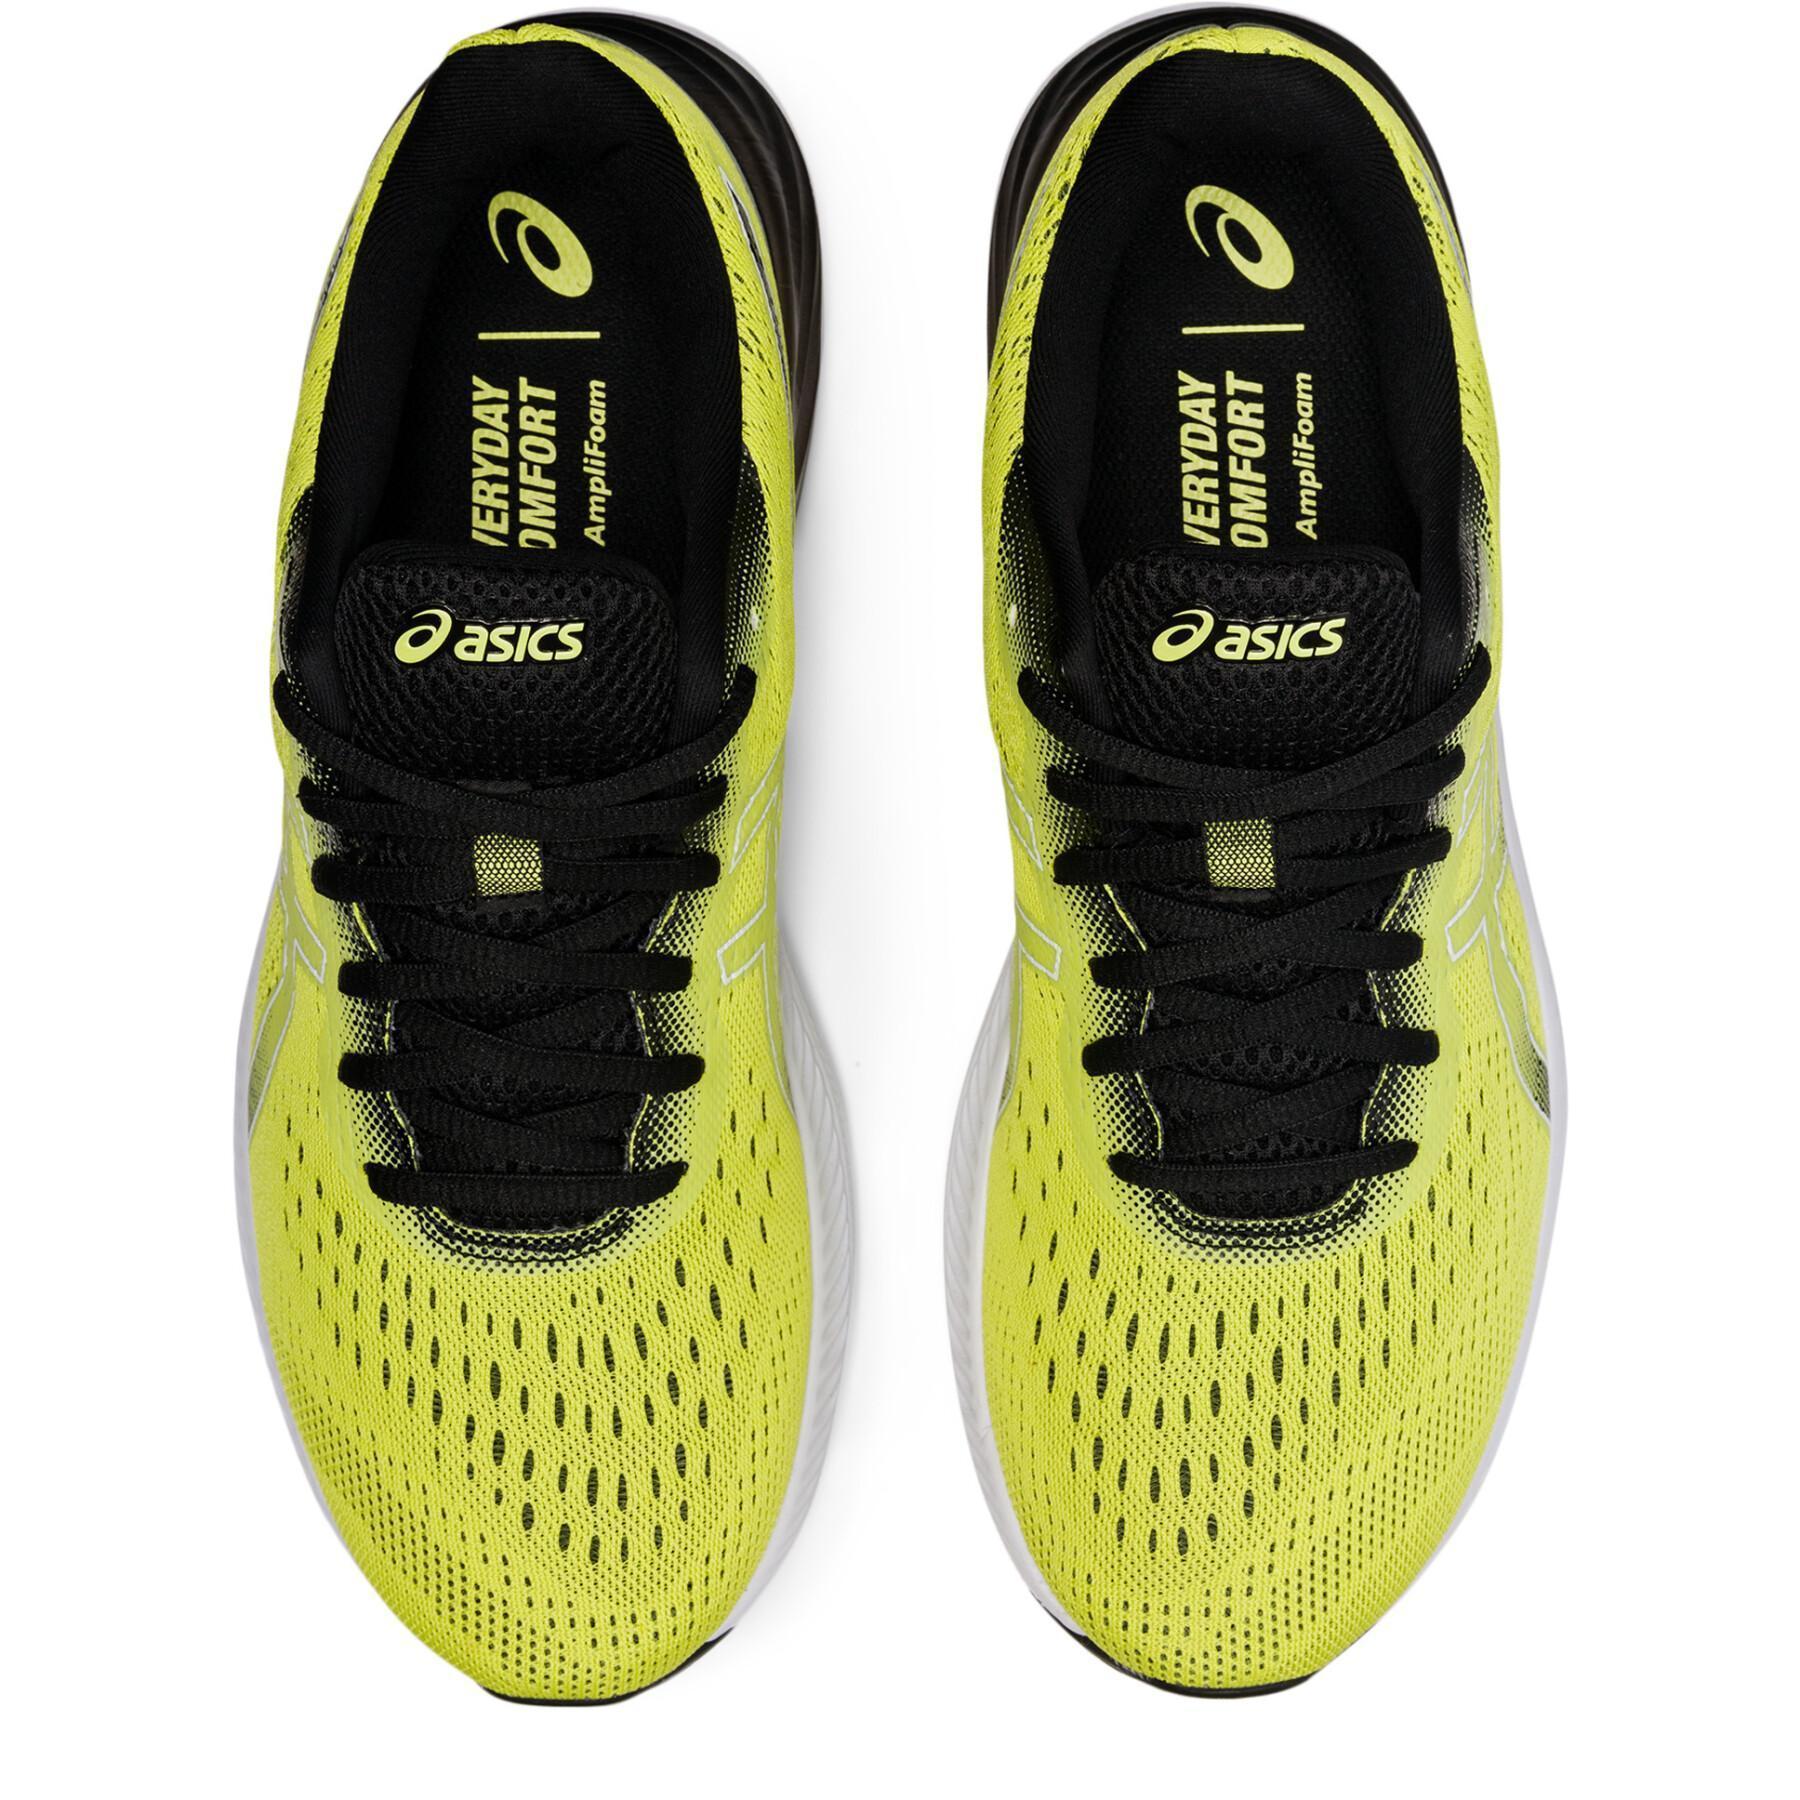 Running shoes Asics Gel-Excite 8